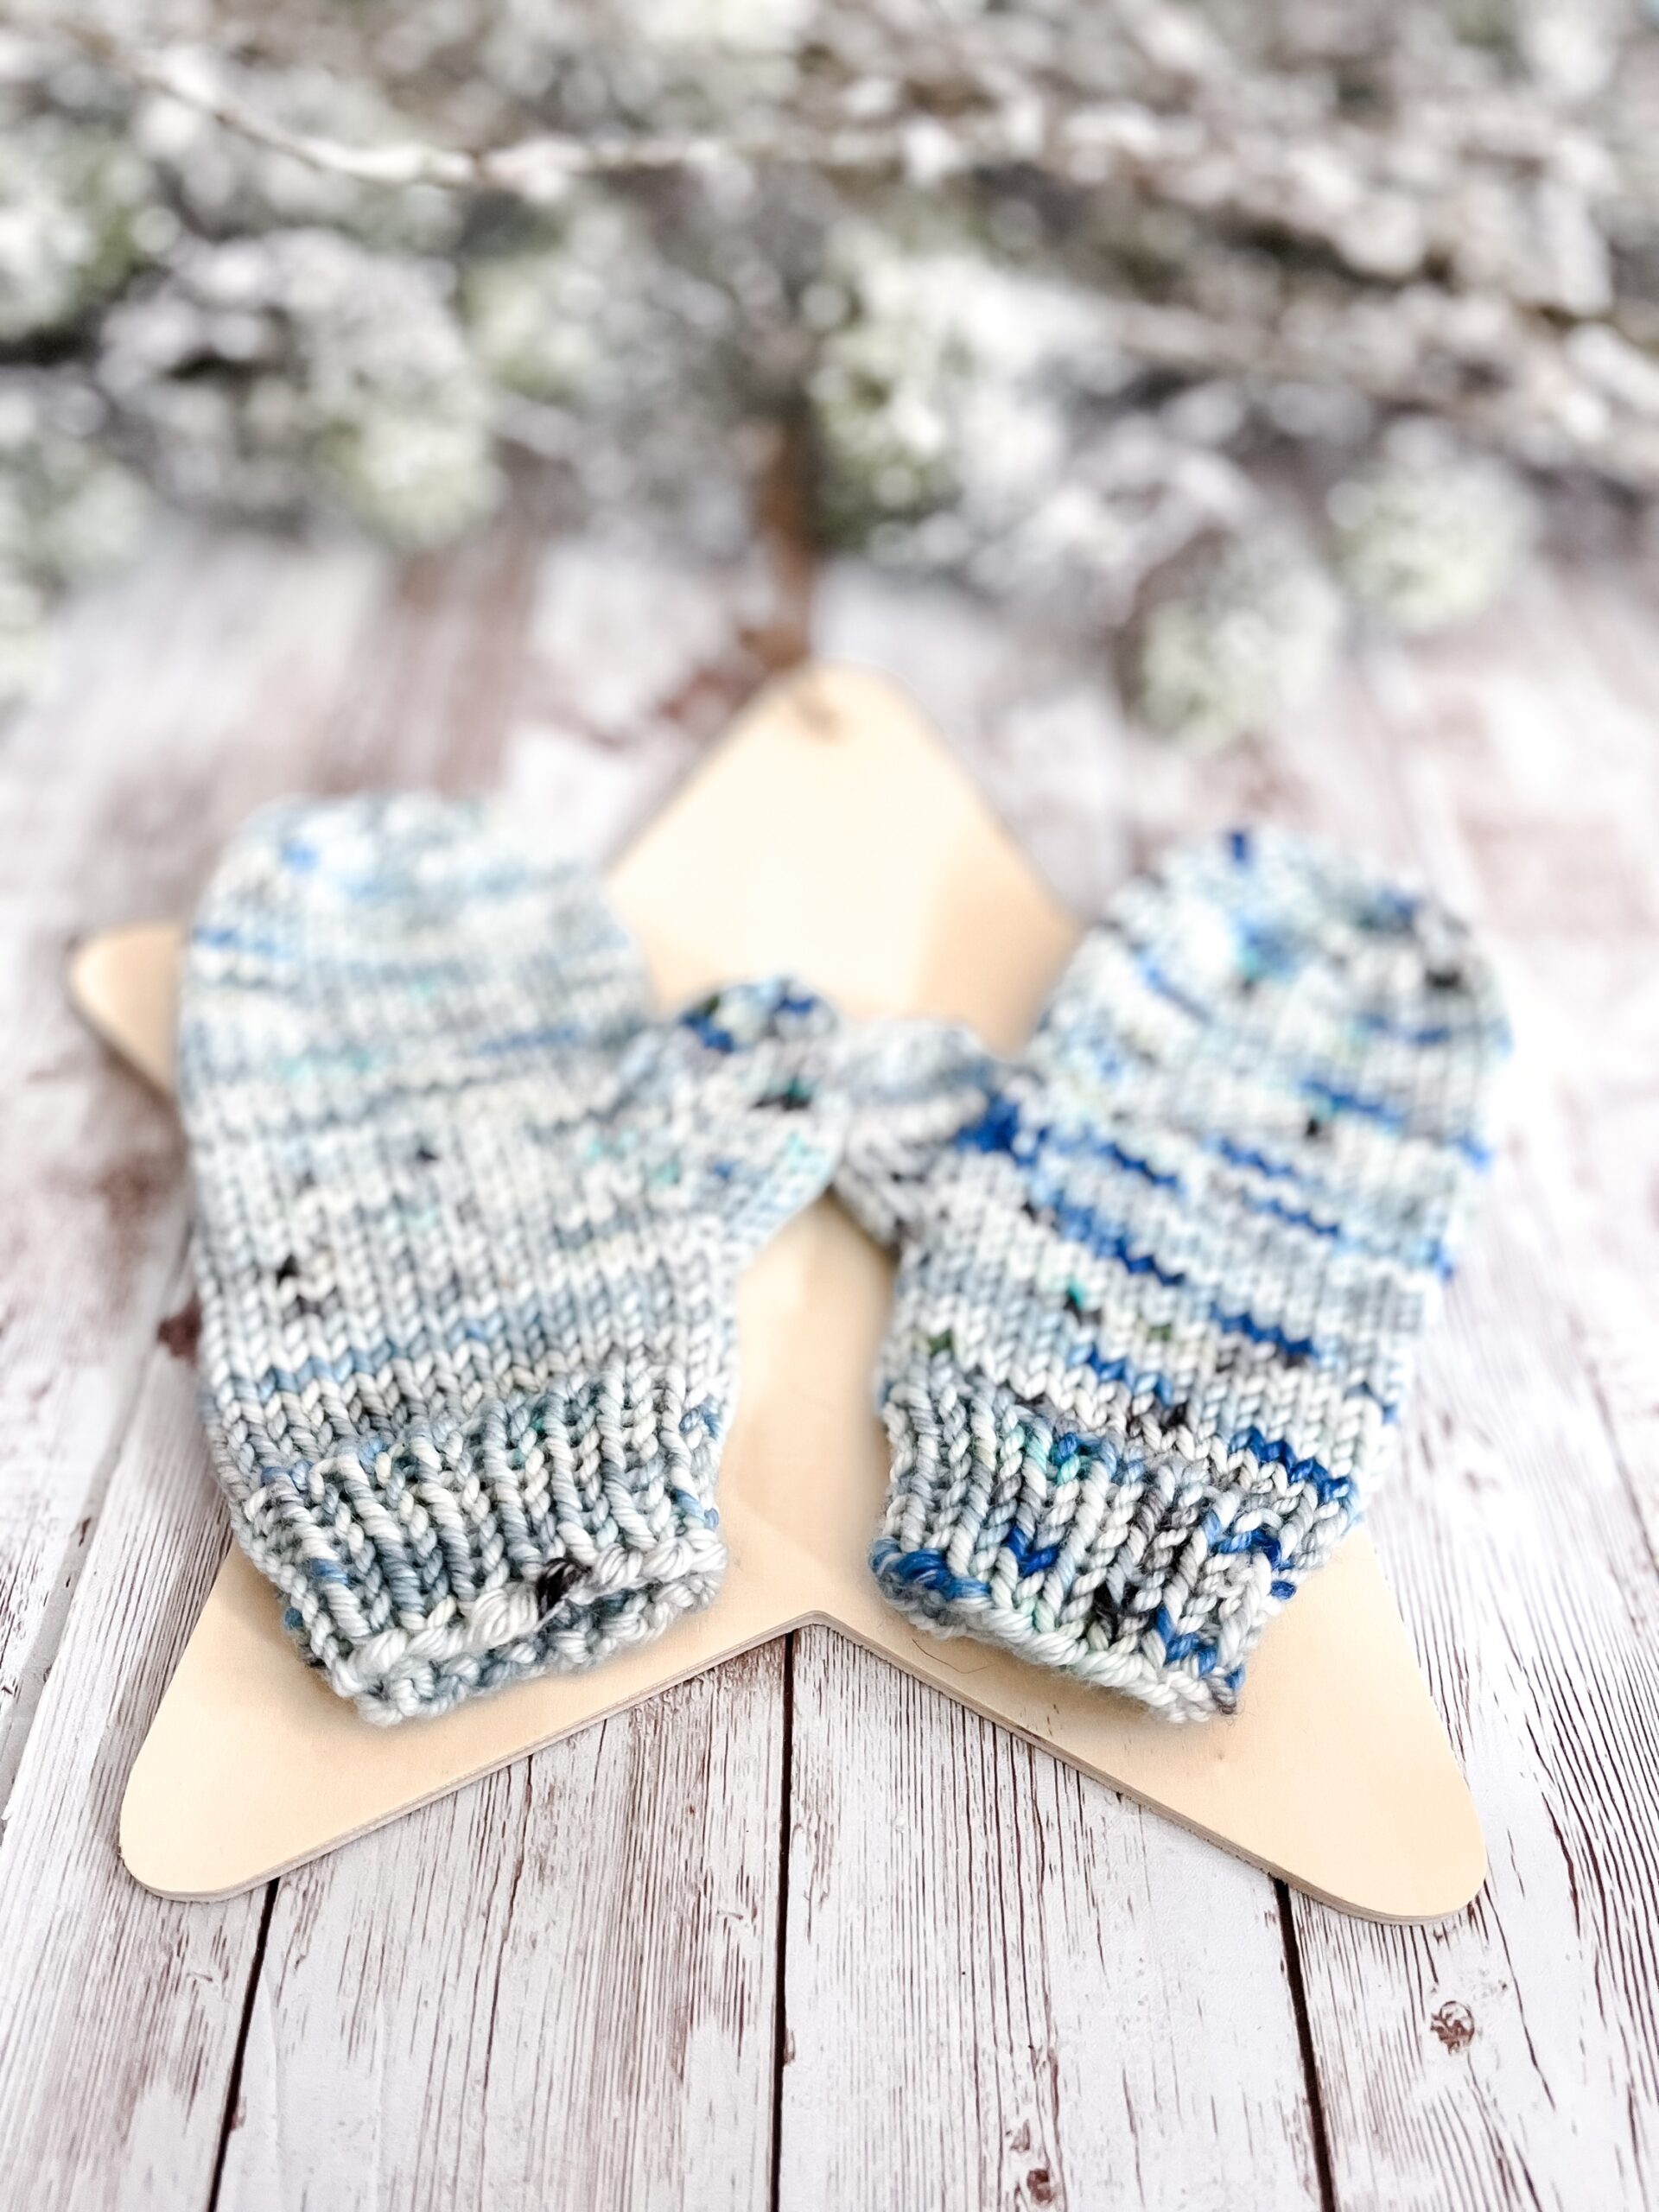 A pair of blue speckled colored mittens rests on a wooden star cutout on a wood plank background. In the background of the photo is snow covered pine branches